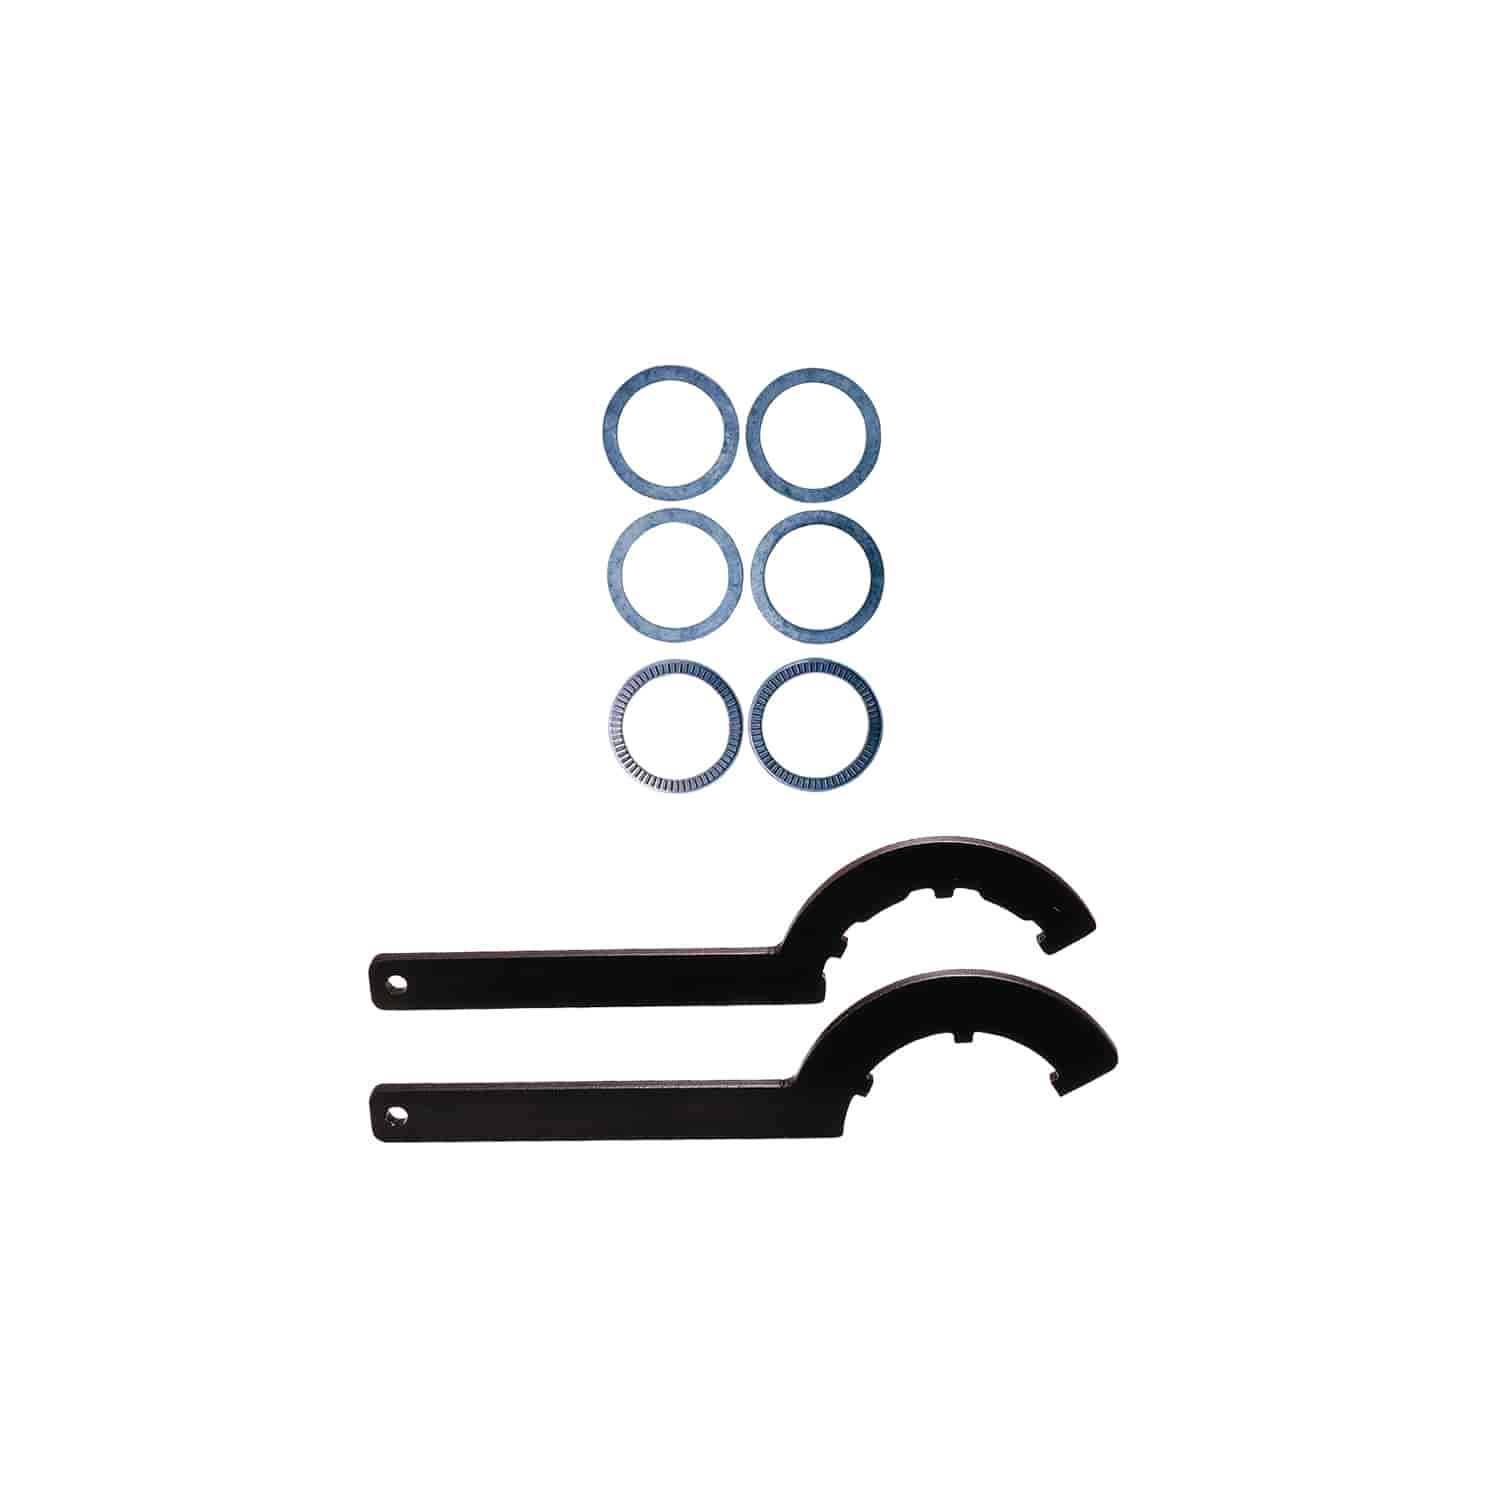 Spanner Wrench & Thrust Bearing Kit Includes spanner wrench and six thrust bearings